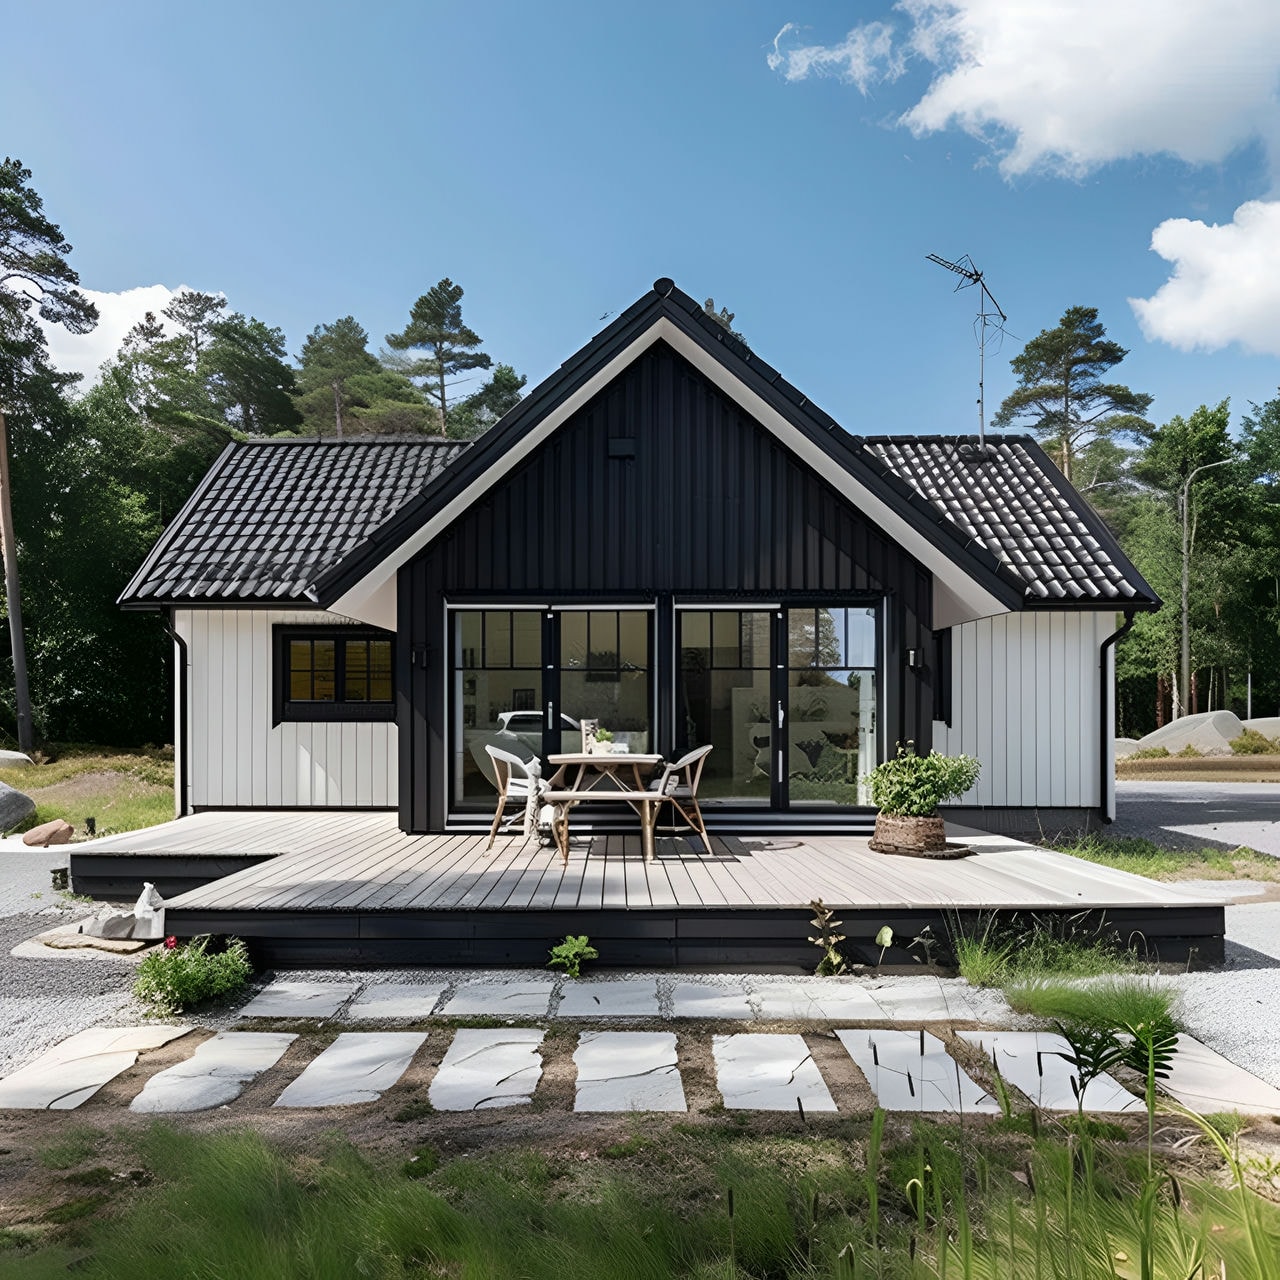 Bungalow: architecture, history, sustainability, materials and typical prices